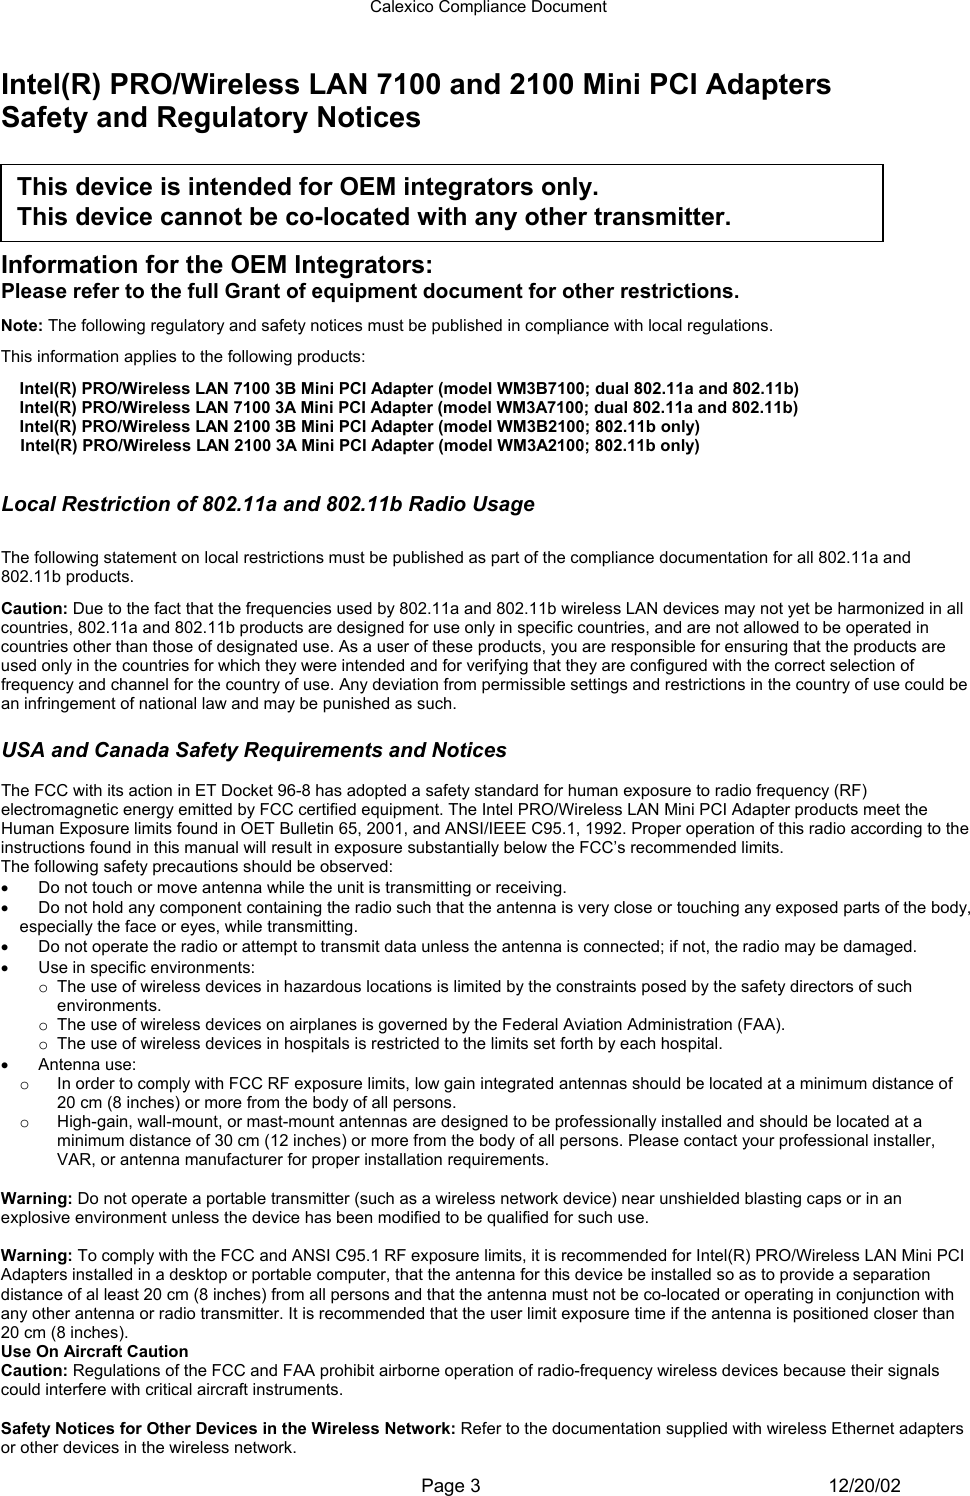 Calexico Compliance Document  Page 3 12/20/02 Intel(R) PRO/Wireless LAN 7100 and 2100 Mini PCI Adapters Safety and Regulatory Notices      Information for the OEM Integrators: Please refer to the full Grant of equipment document for other restrictions.    Note: The following regulatory and safety notices must be published in compliance with local regulations.  This information applies to the following products: Intel(R) PRO/Wireless LAN 7100 3B Mini PCI Adapter (model WM3B7100; dual 802.11a and 802.11b) Intel(R) PRO/Wireless LAN 7100 3A Mini PCI Adapter (model WM3A7100; dual 802.11a and 802.11b) Intel(R) PRO/Wireless LAN 2100 3B Mini PCI Adapter (model WM3B2100; 802.11b only) Intel(R) PRO/Wireless LAN 2100 3A Mini PCI Adapter (model WM3A2100; 802.11b only)  Local Restriction of 802.11a and 802.11b Radio Usage  The following statement on local restrictions must be published as part of the compliance documentation for all 802.11a and 802.11b products. Caution: Due to the fact that the frequencies used by 802.11a and 802.11b wireless LAN devices may not yet be harmonized in all countries, 802.11a and 802.11b products are designed for use only in specific countries, and are not allowed to be operated in countries other than those of designated use. As a user of these products, you are responsible for ensuring that the products are used only in the countries for which they were intended and for verifying that they are configured with the correct selection of frequency and channel for the country of use. Any deviation from permissible settings and restrictions in the country of use could be an infringement of national law and may be punished as such.  USA and Canada Safety Requirements and Notices  The FCC with its action in ET Docket 96-8 has adopted a safety standard for human exposure to radio frequency (RF) electromagnetic energy emitted by FCC certified equipment. The Intel PRO/Wireless LAN Mini PCI Adapter products meet the Human Exposure limits found in OET Bulletin 65, 2001, and ANSI/IEEE C95.1, 1992. Proper operation of this radio according to the instructions found in this manual will result in exposure substantially below the FCC’s recommended limits. The following safety precautions should be observed: •  Do not touch or move antenna while the unit is transmitting or receiving.  •  Do not hold any component containing the radio such that the antenna is very close or touching any exposed parts of the body, especially the face or eyes, while transmitting.  •  Do not operate the radio or attempt to transmit data unless the antenna is connected; if not, the radio may be damaged.  •  Use in specific environments:  o The use of wireless devices in hazardous locations is limited by the constraints posed by the safety directors of such environments.  o The use of wireless devices on airplanes is governed by the Federal Aviation Administration (FAA).  o The use of wireless devices in hospitals is restricted to the limits set forth by each hospital.  •  Antenna use:  o  In order to comply with FCC RF exposure limits, low gain integrated antennas should be located at a minimum distance of 20 cm (8 inches) or more from the body of all persons.  o  High-gain, wall-mount, or mast-mount antennas are designed to be professionally installed and should be located at a minimum distance of 30 cm (12 inches) or more from the body of all persons. Please contact your professional installer, VAR, or antenna manufacturer for proper installation requirements.  Explosive Device Proximity Warning Warning: Do not operate a portable transmitter (such as a wireless network device) near unshielded blasting caps or in an explosive environment unless the device has been modified to be qualified for such use. Antenna Warning Warning: To comply with the FCC and ANSI C95.1 RF exposure limits, it is recommended for Intel(R) PRO/Wireless LAN Mini PCI Adapters installed in a desktop or portable computer, that the antenna for this device be installed so as to provide a separation distance of al least 20 cm (8 inches) from all persons and that the antenna must not be co-located or operating in conjunction with any other antenna or radio transmitter. It is recommended that the user limit exposure time if the antenna is positioned closer than 20 cm (8 inches). Use On Aircraft Caution Caution: Regulations of the FCC and FAA prohibit airborne operation of radio-frequency wireless devices because their signals could interfere with critical aircraft instruments. Other Wireless Devices Safety Notices for Other Devices in the Wireless Network: Refer to the documentation supplied with wireless Ethernet adapters or other devices in the wireless network. This device is intended for OEM integrators only.  This device cannot be co-located with any other transmitter.  